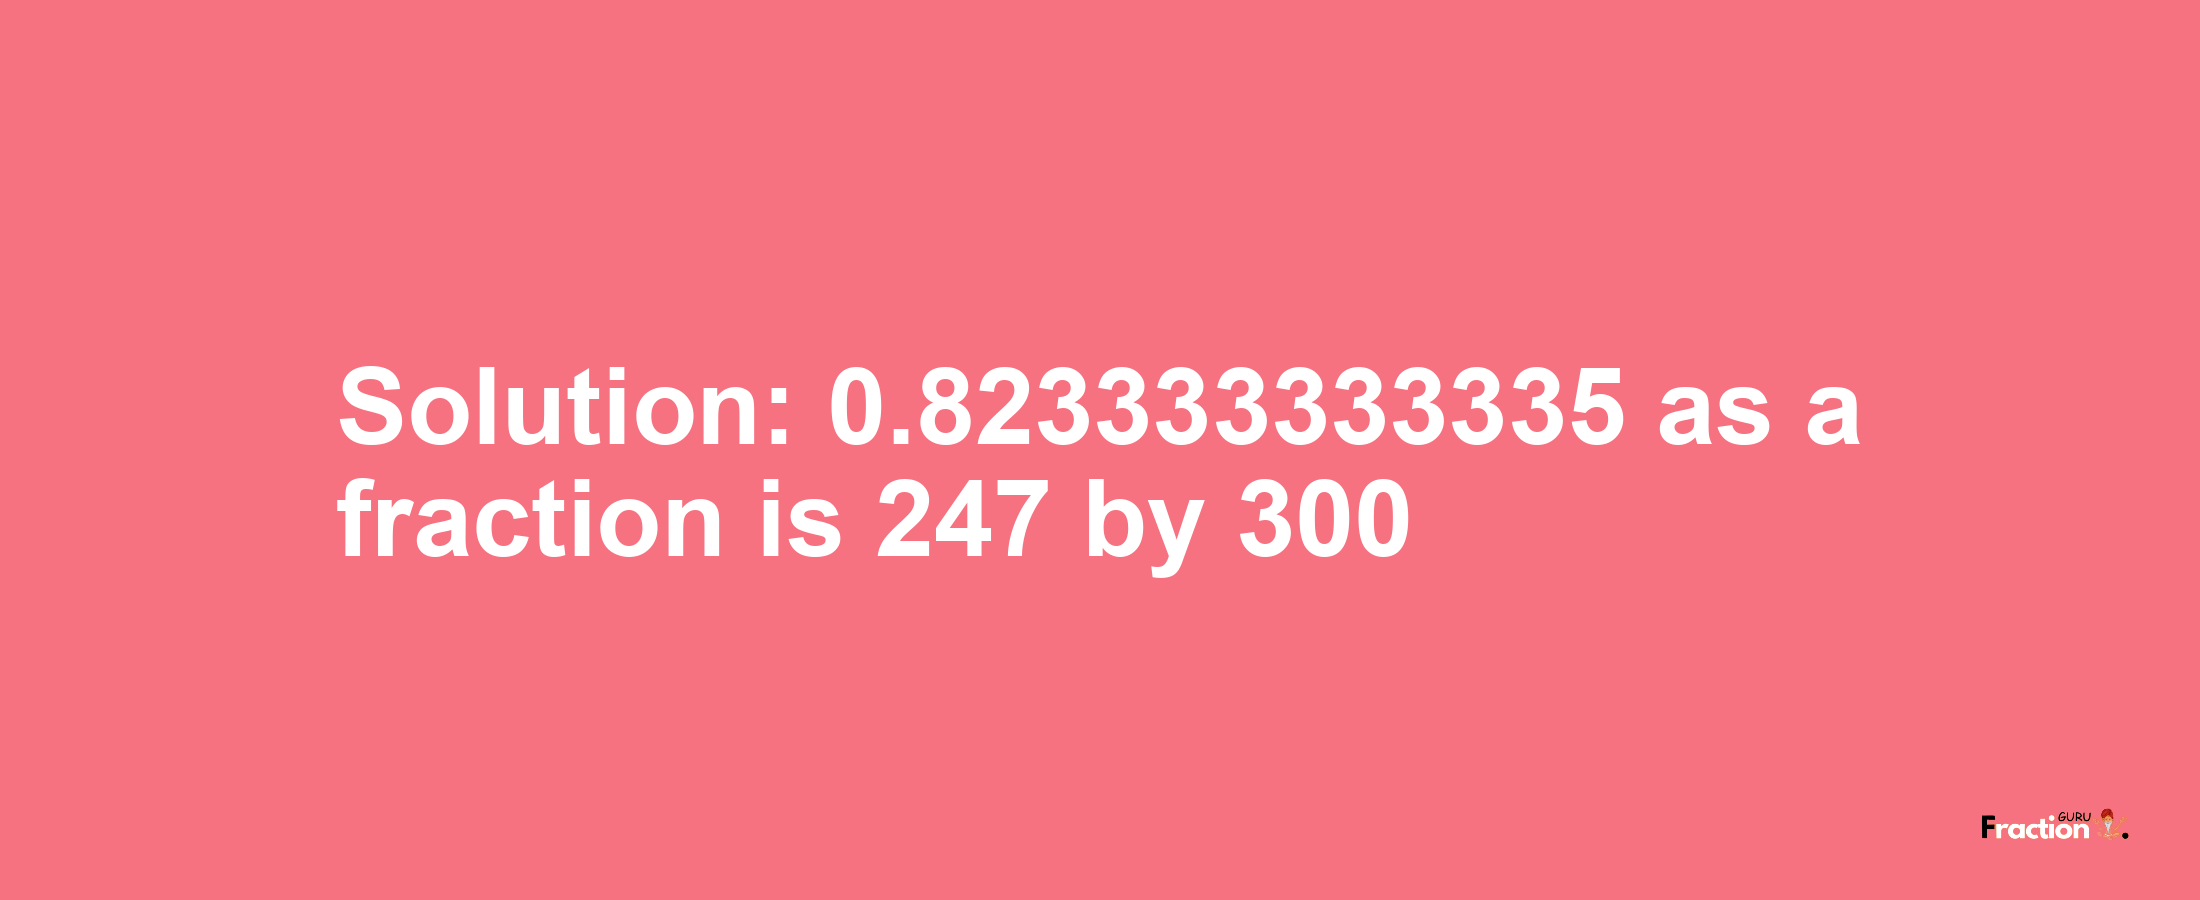 Solution:0.823333333335 as a fraction is 247/300